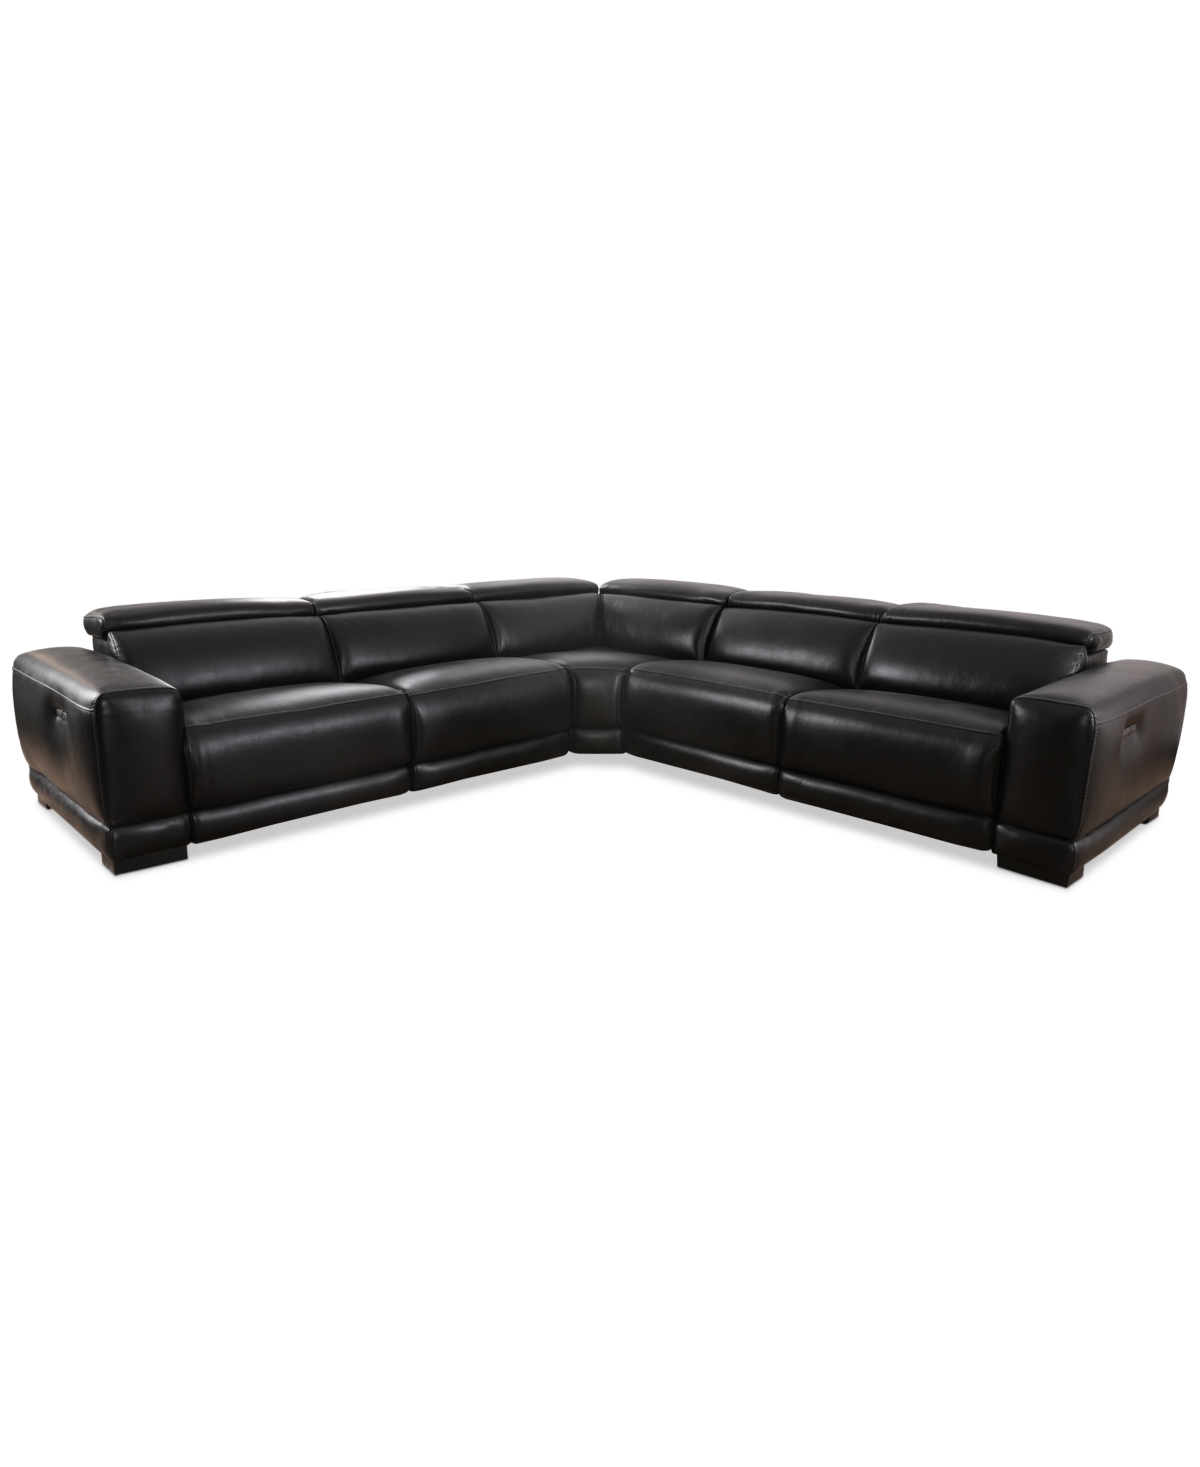 Furniture Krofton 5-pc. Beyond Leather Fabric Sectional With 3 Power Motion Recliners, Created For Macy's In Blackberry